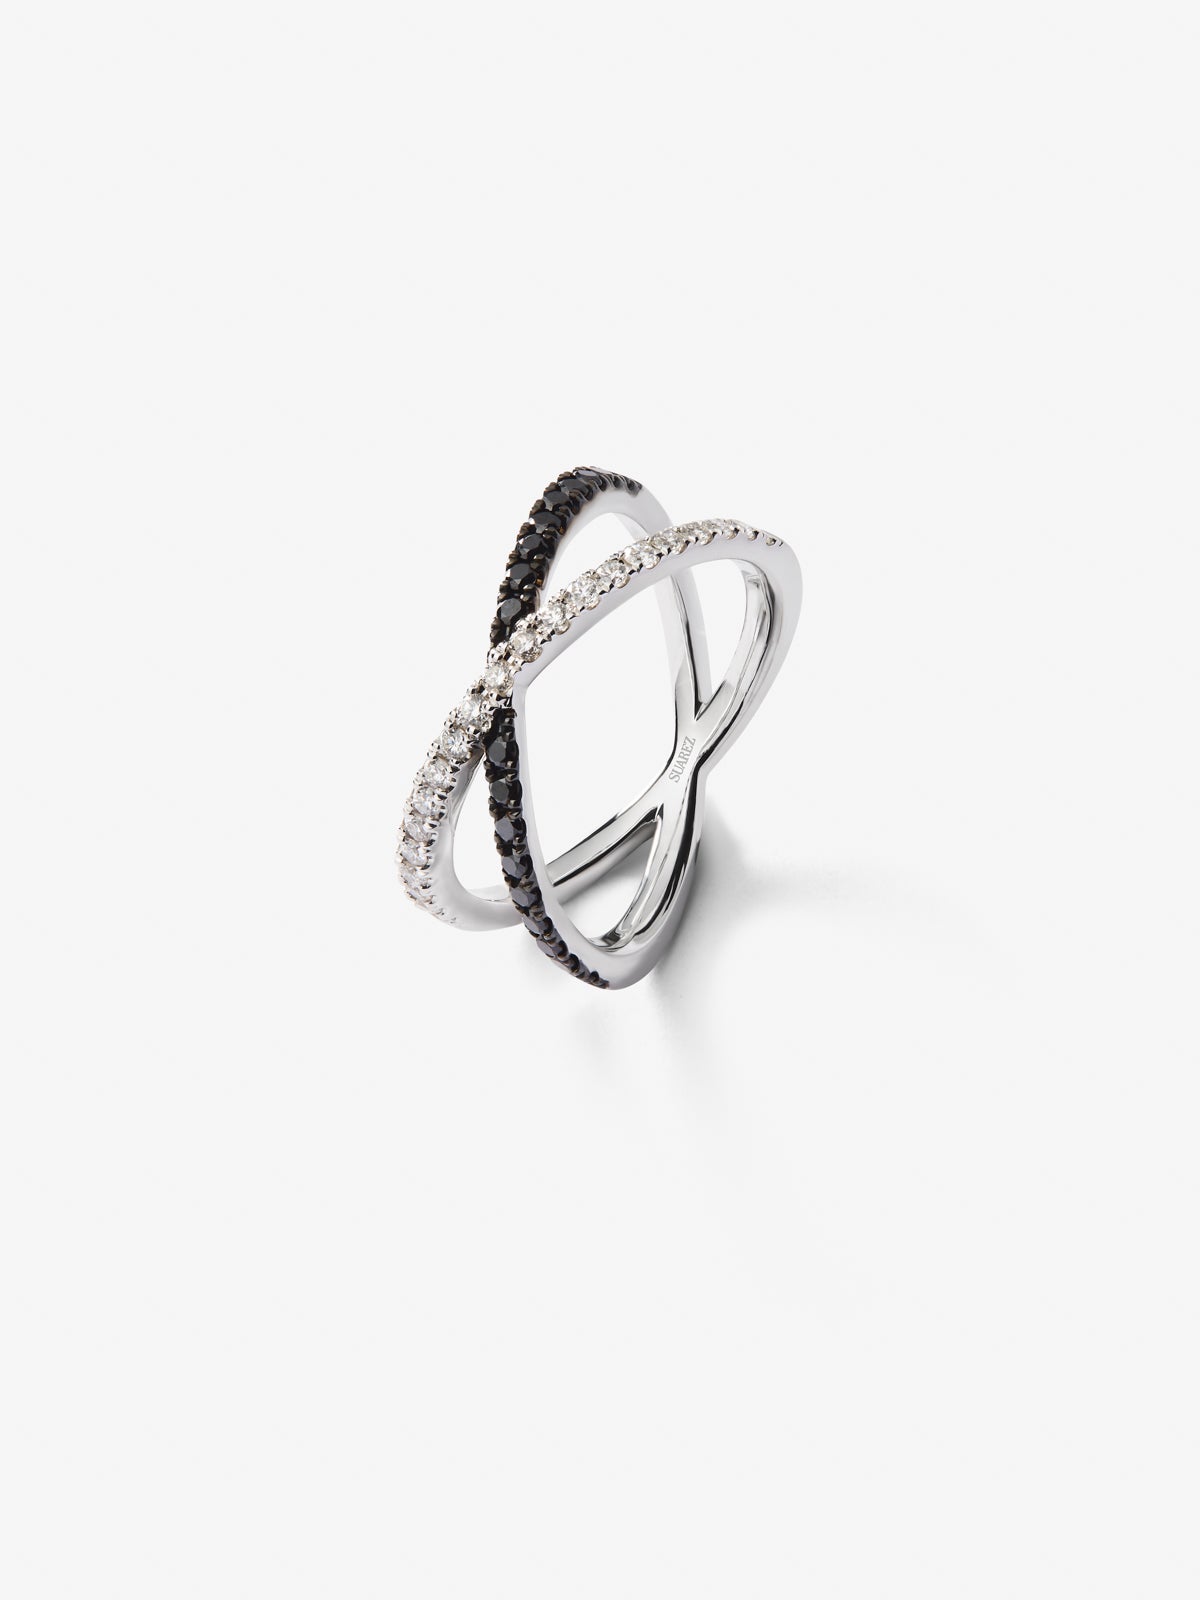 18K white gold cross ring with 21 brilliant-cut diamonds with a total of 0.25 cts and 18 brilliant-cut black diamonds with a total of 0.24 cts